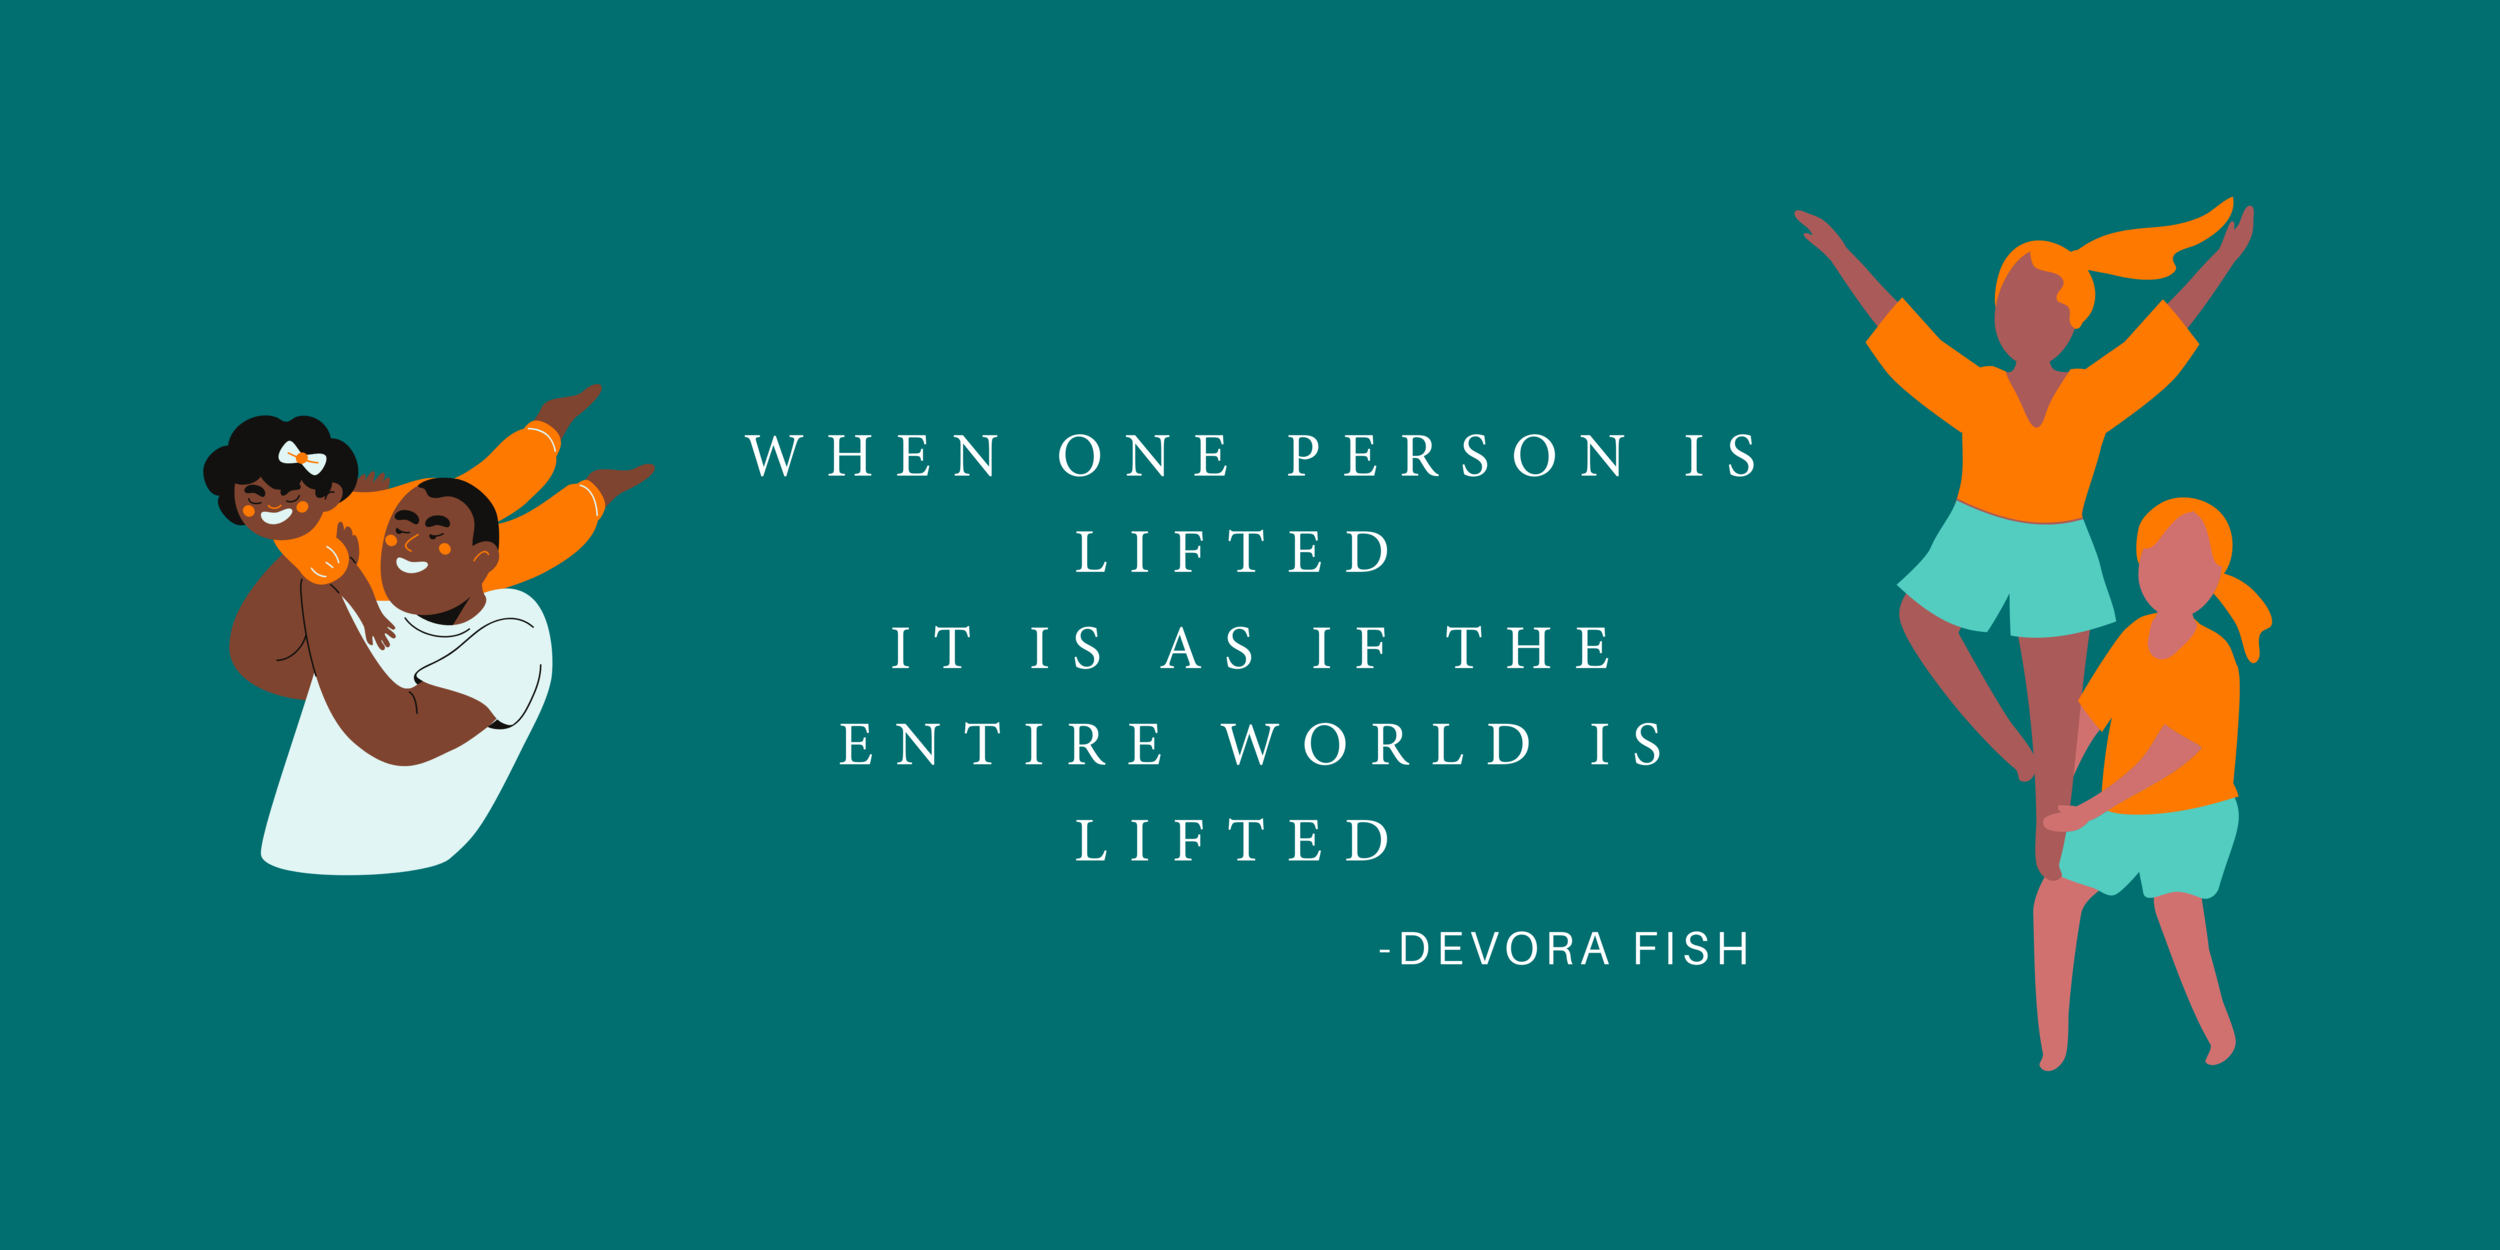 Devora Yellin Fish says, "When One Person Is Lifted, It Is As If The Entire World Is Lifted."